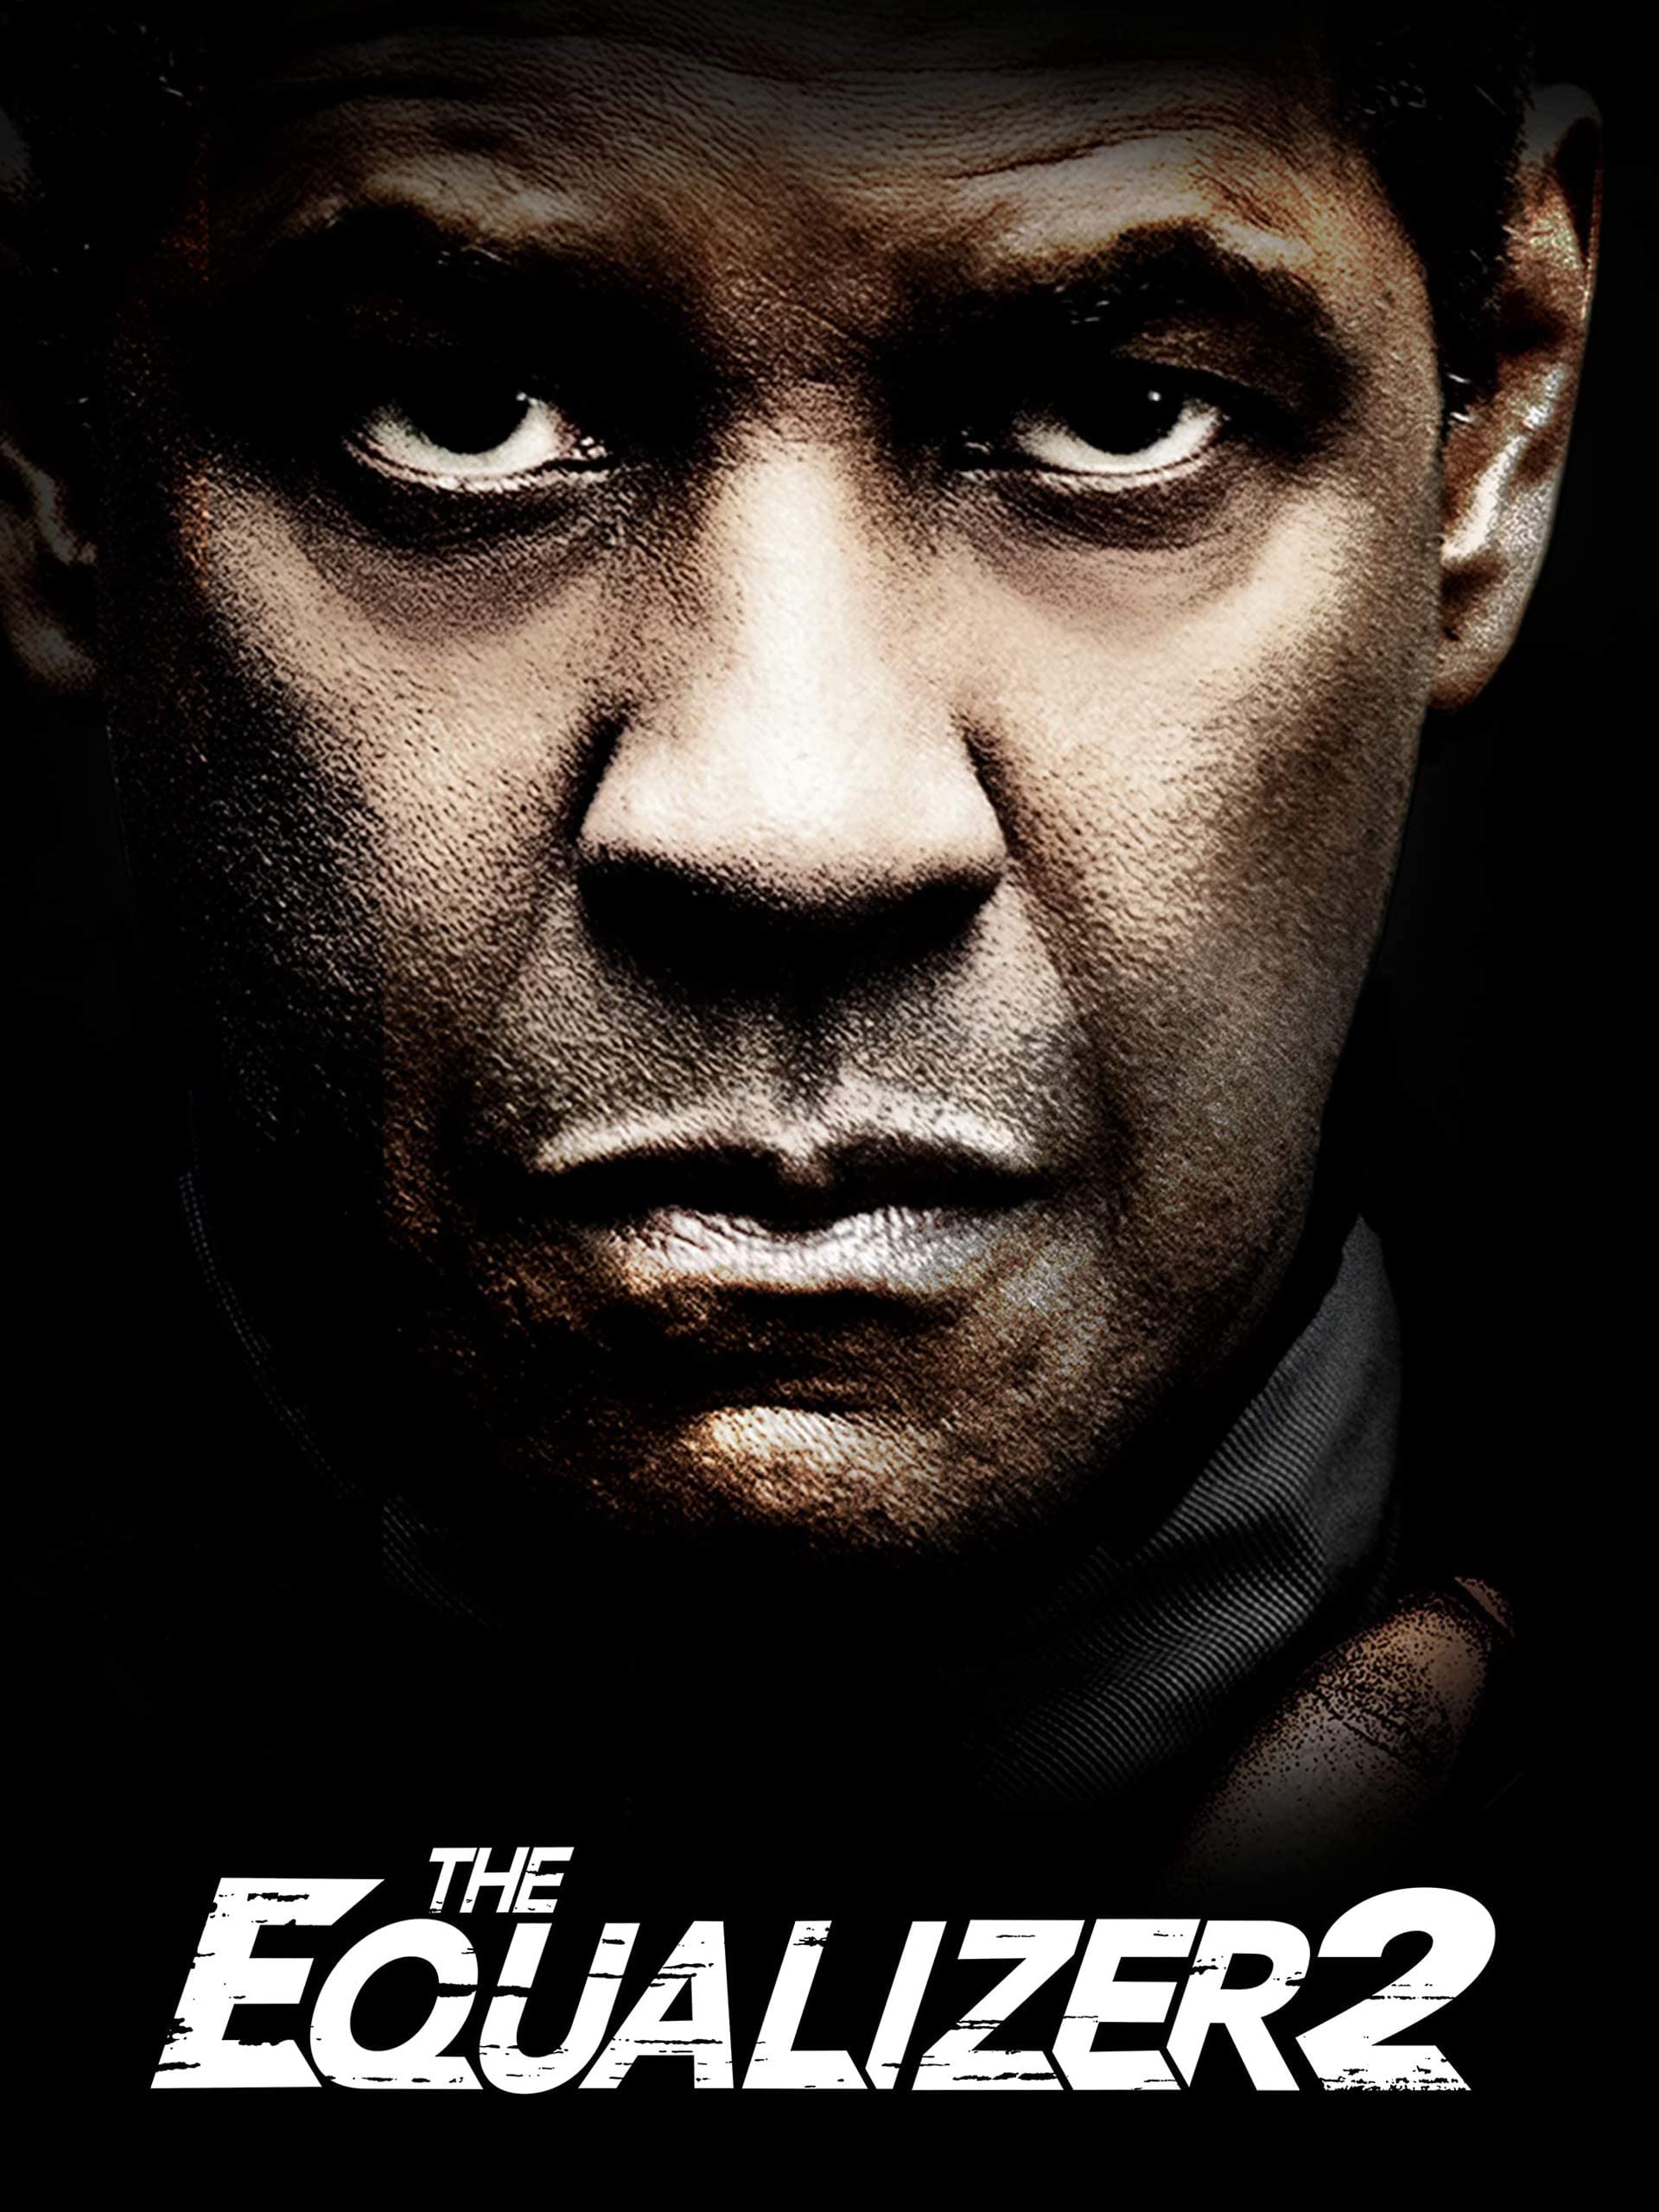 https://static.wikia.nocookie.net/the-equalizer/images/3/34/The_Equalizer_2_poster_7.jpg/revision/latest?cb=20230903123918